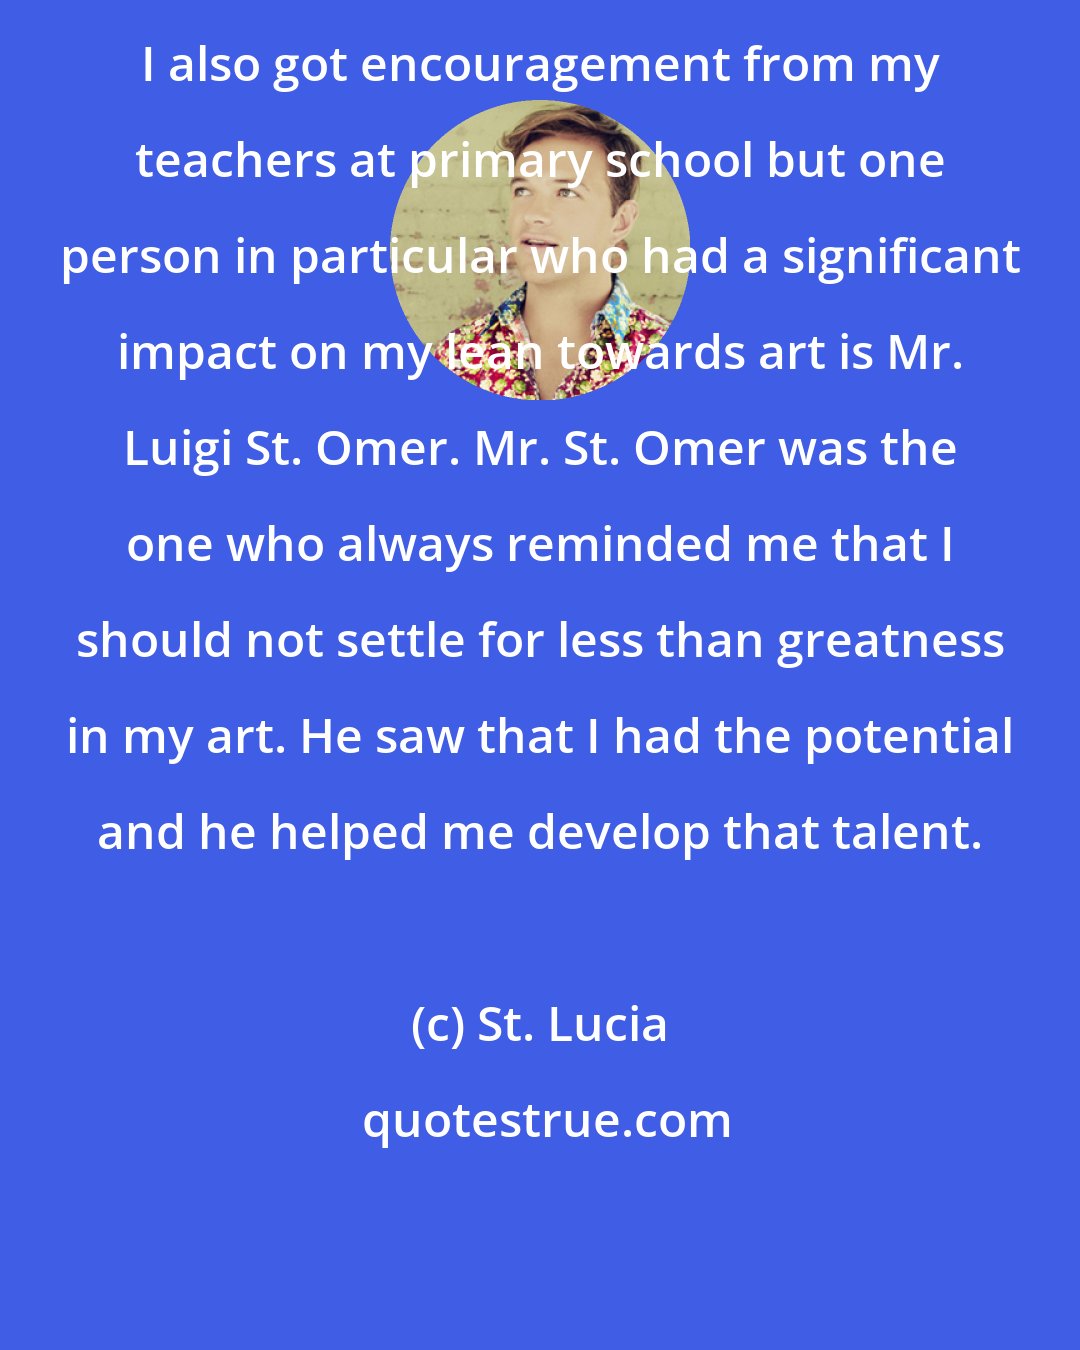 St. Lucia: I also got encouragement from my teachers at primary school but one person in particular who had a significant impact on my lean towards art is Mr. Luigi St. Omer. Mr. St. Omer was the one who always reminded me that I should not settle for less than greatness in my art. He saw that I had the potential and he helped me develop that talent.